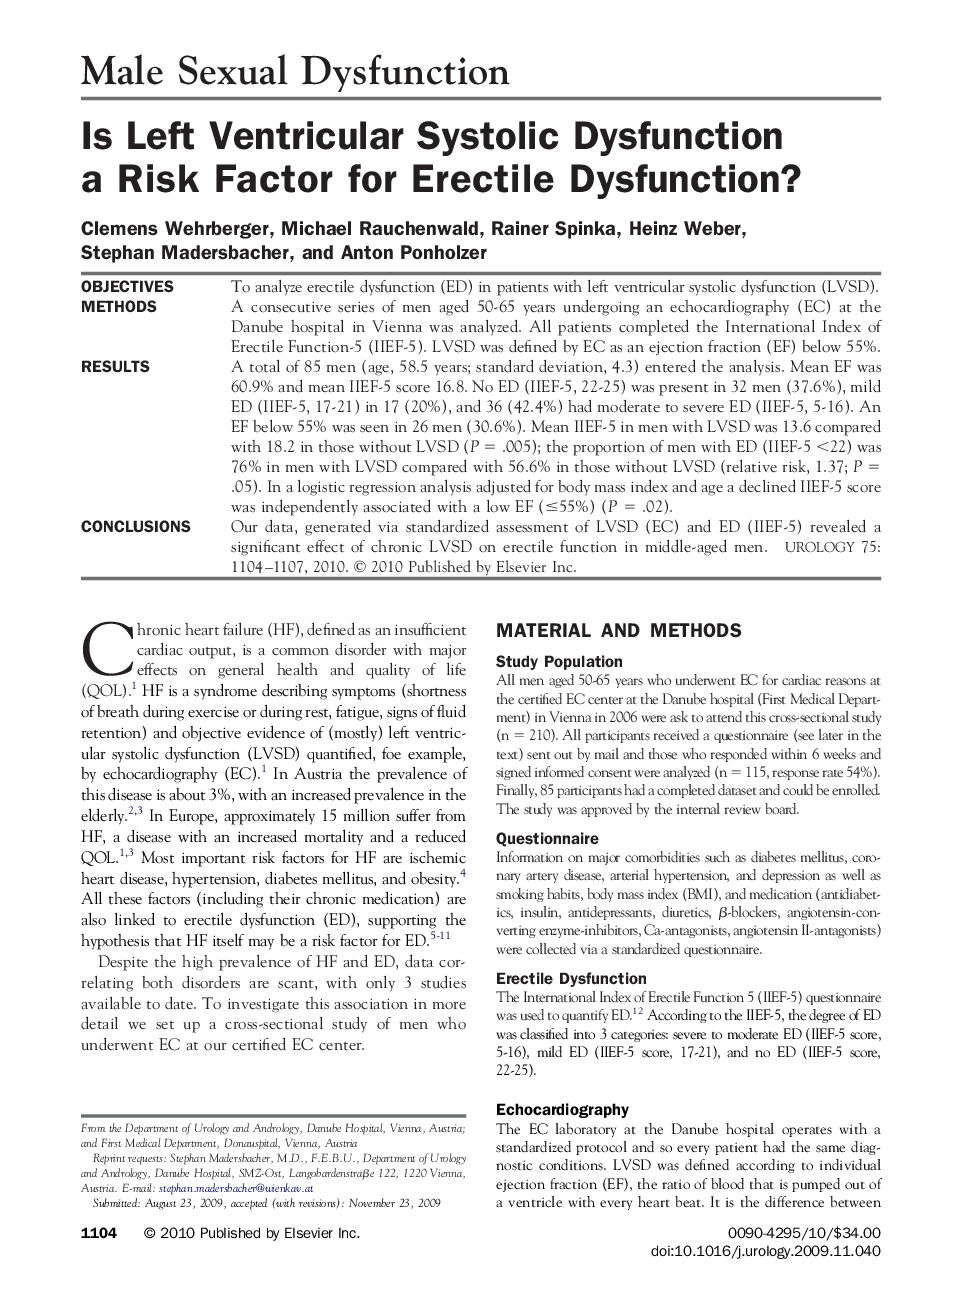 Is Left Ventricular Systolic Dysfunction a Risk Factor for Erectile Dysfunction?